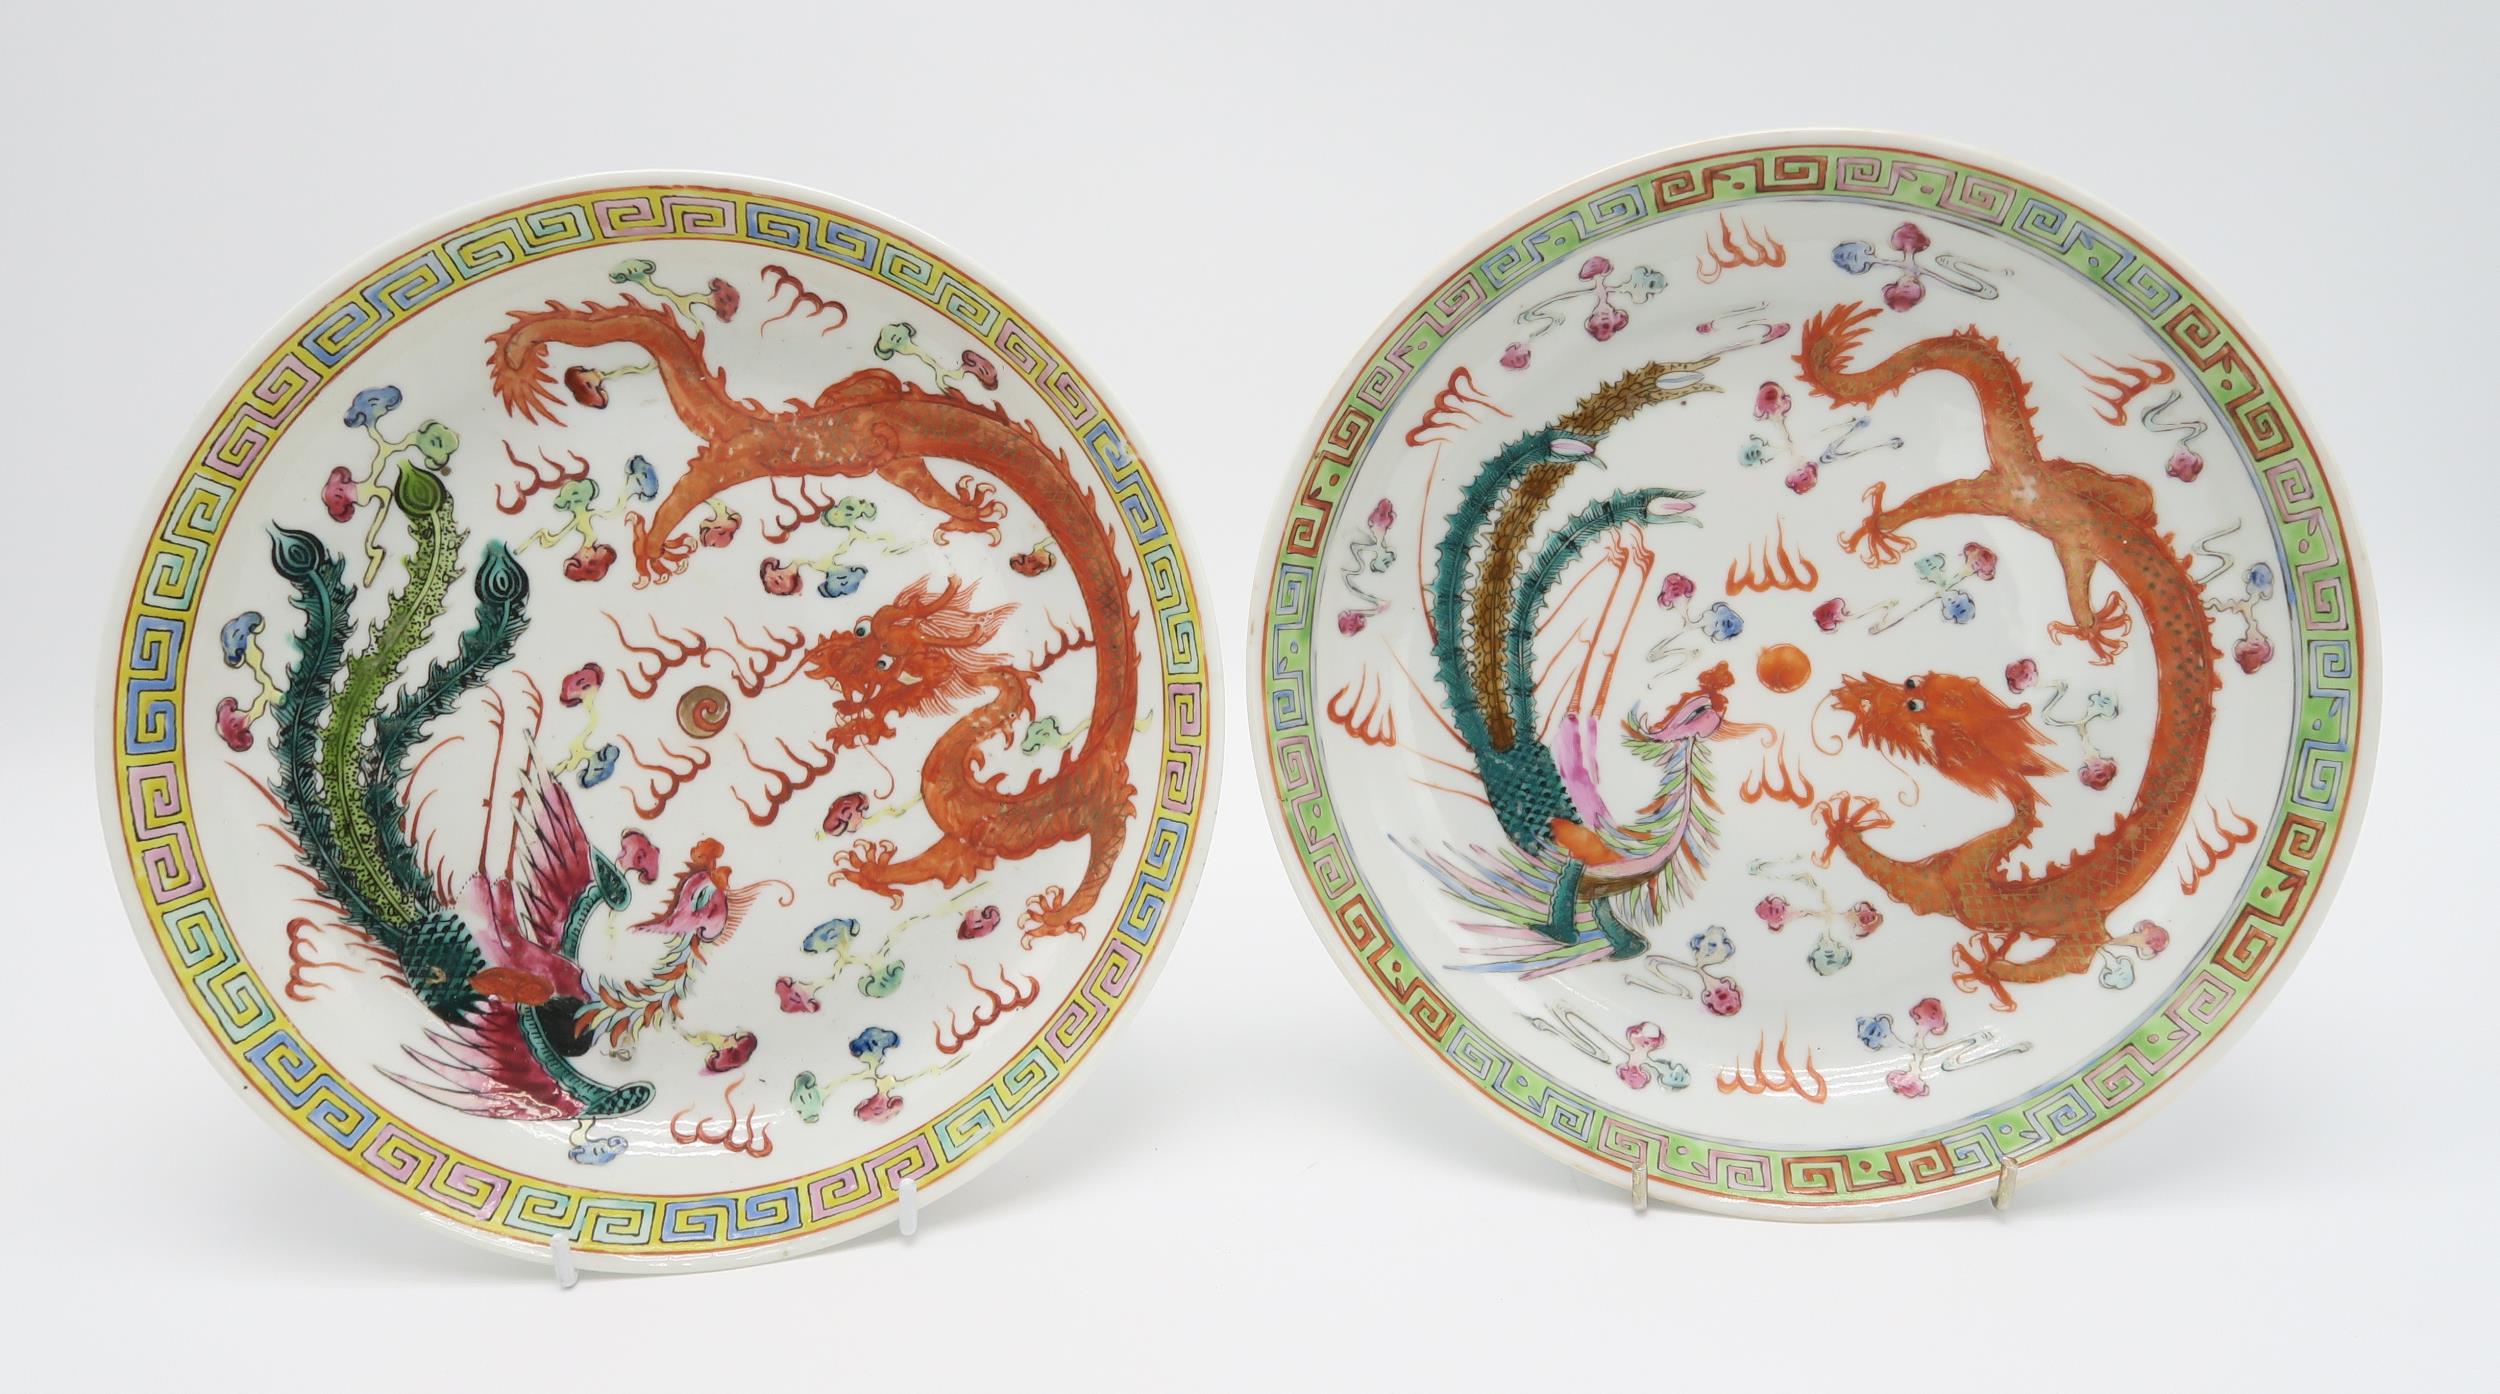 TWO SIMILAR CHINESE DISHES Painted with red dragons and phoenix birds,within key pattern borders, - Image 2 of 9